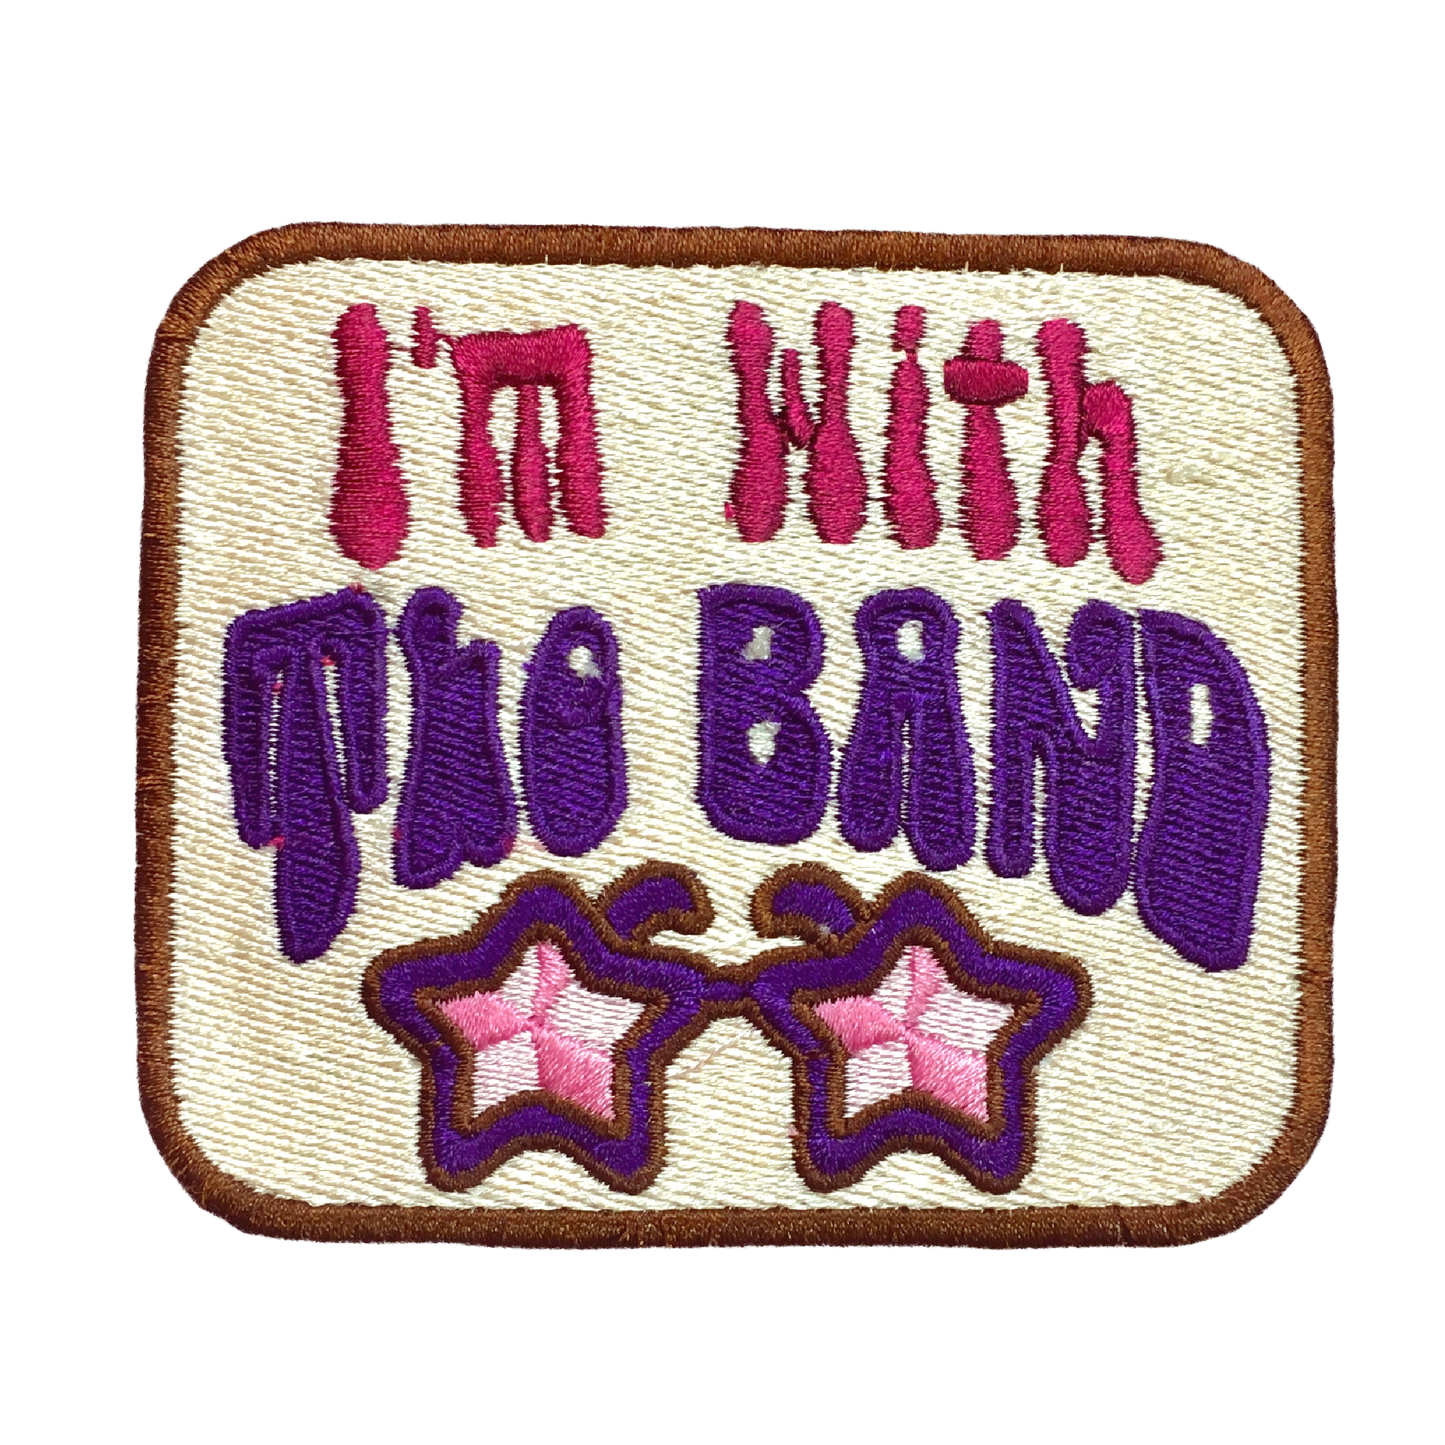 The Groupie Patch